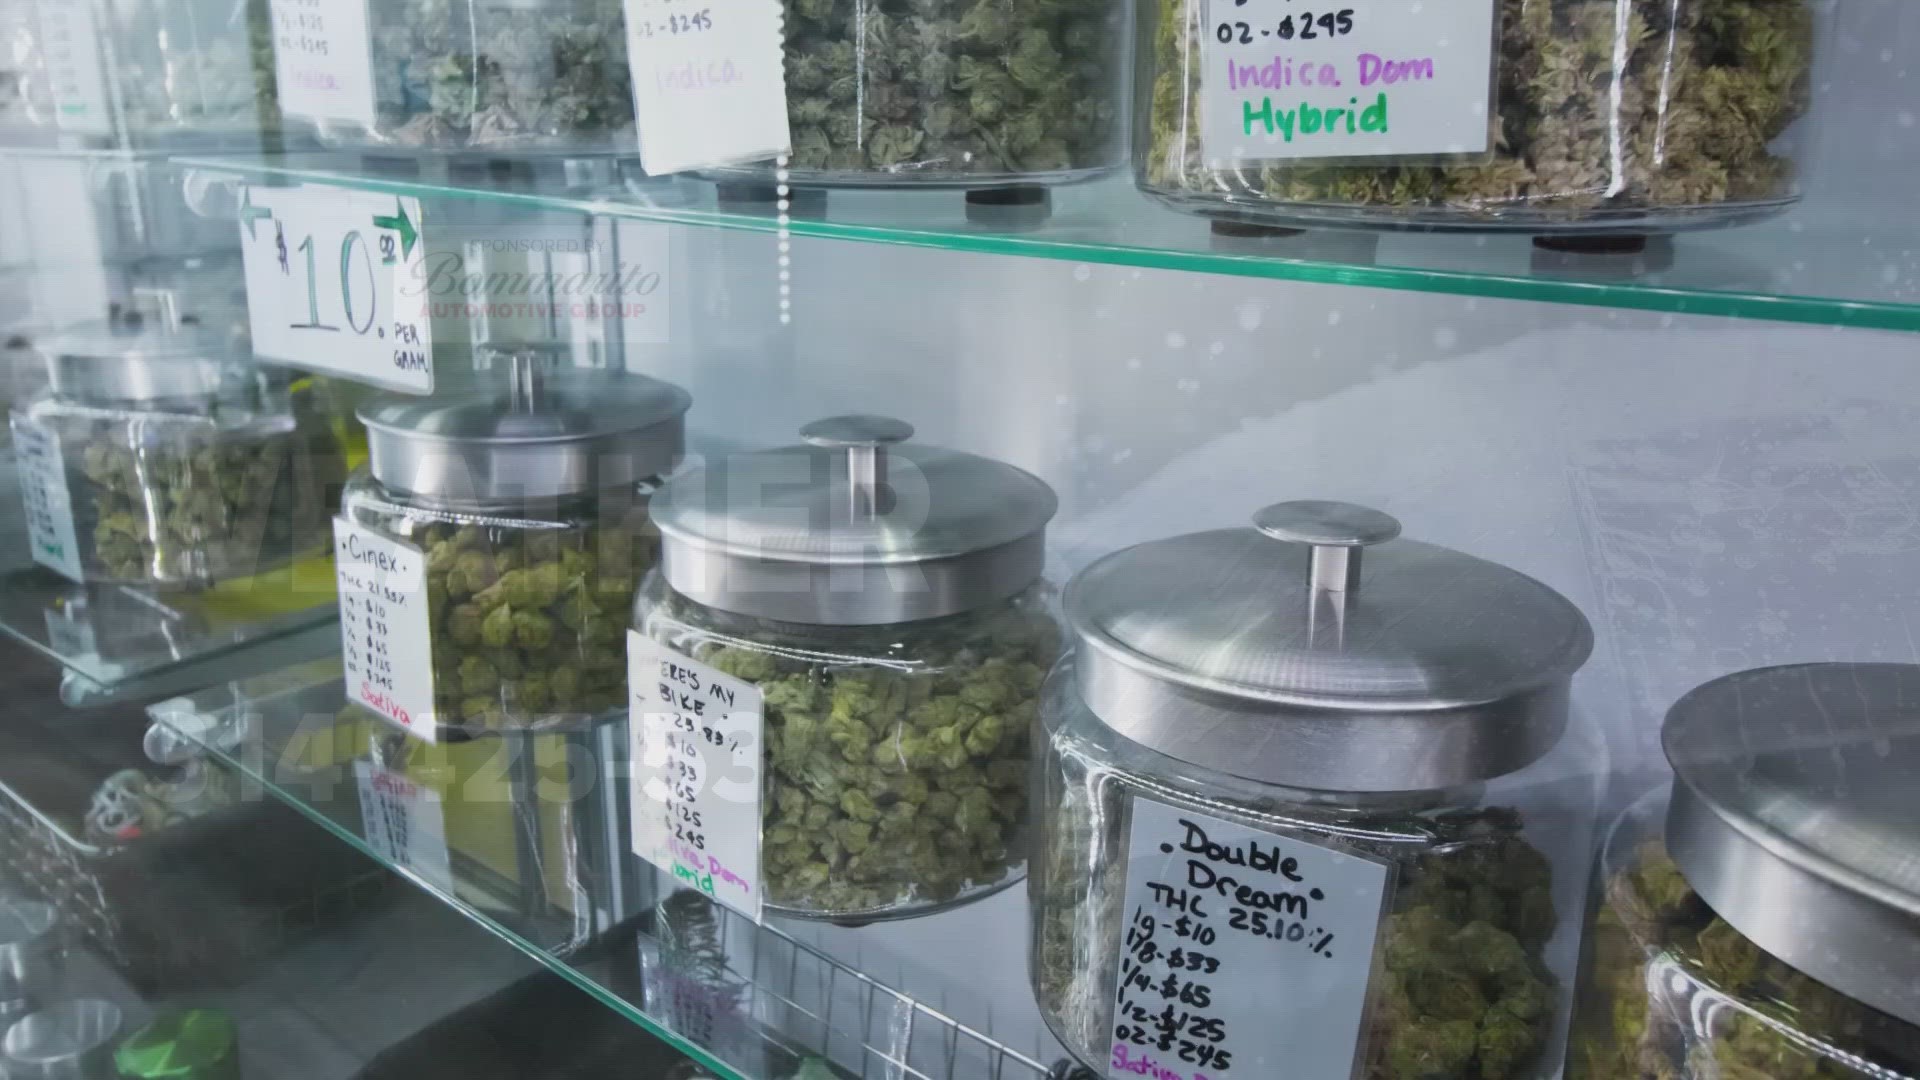 Feel State Dispensary's parking lot was packed with tents full of food and fun in celebration of 4/20. Here's how busy business has been after marijuana legalization